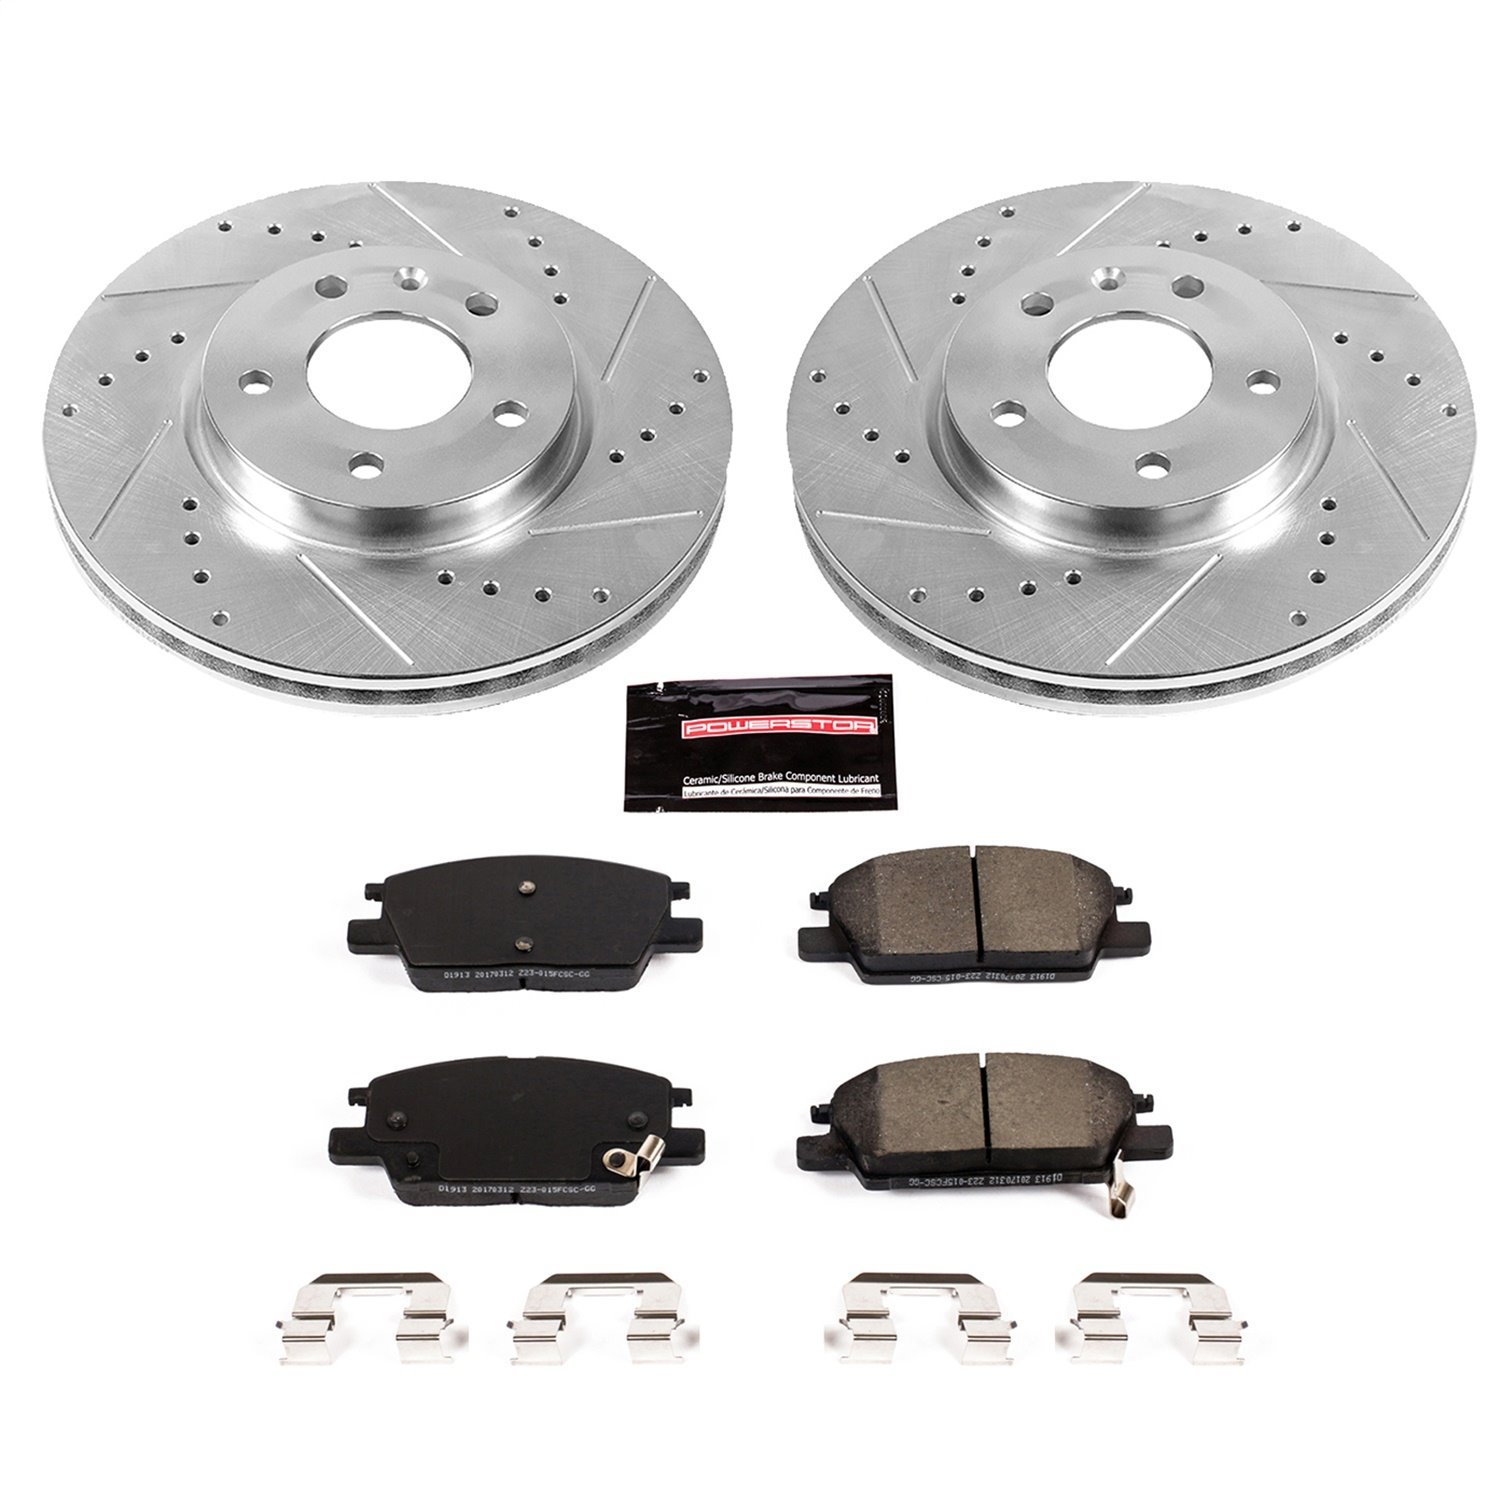 High Performance Brake Upgrade Kit Cross-Drilled and Slotted Rotors